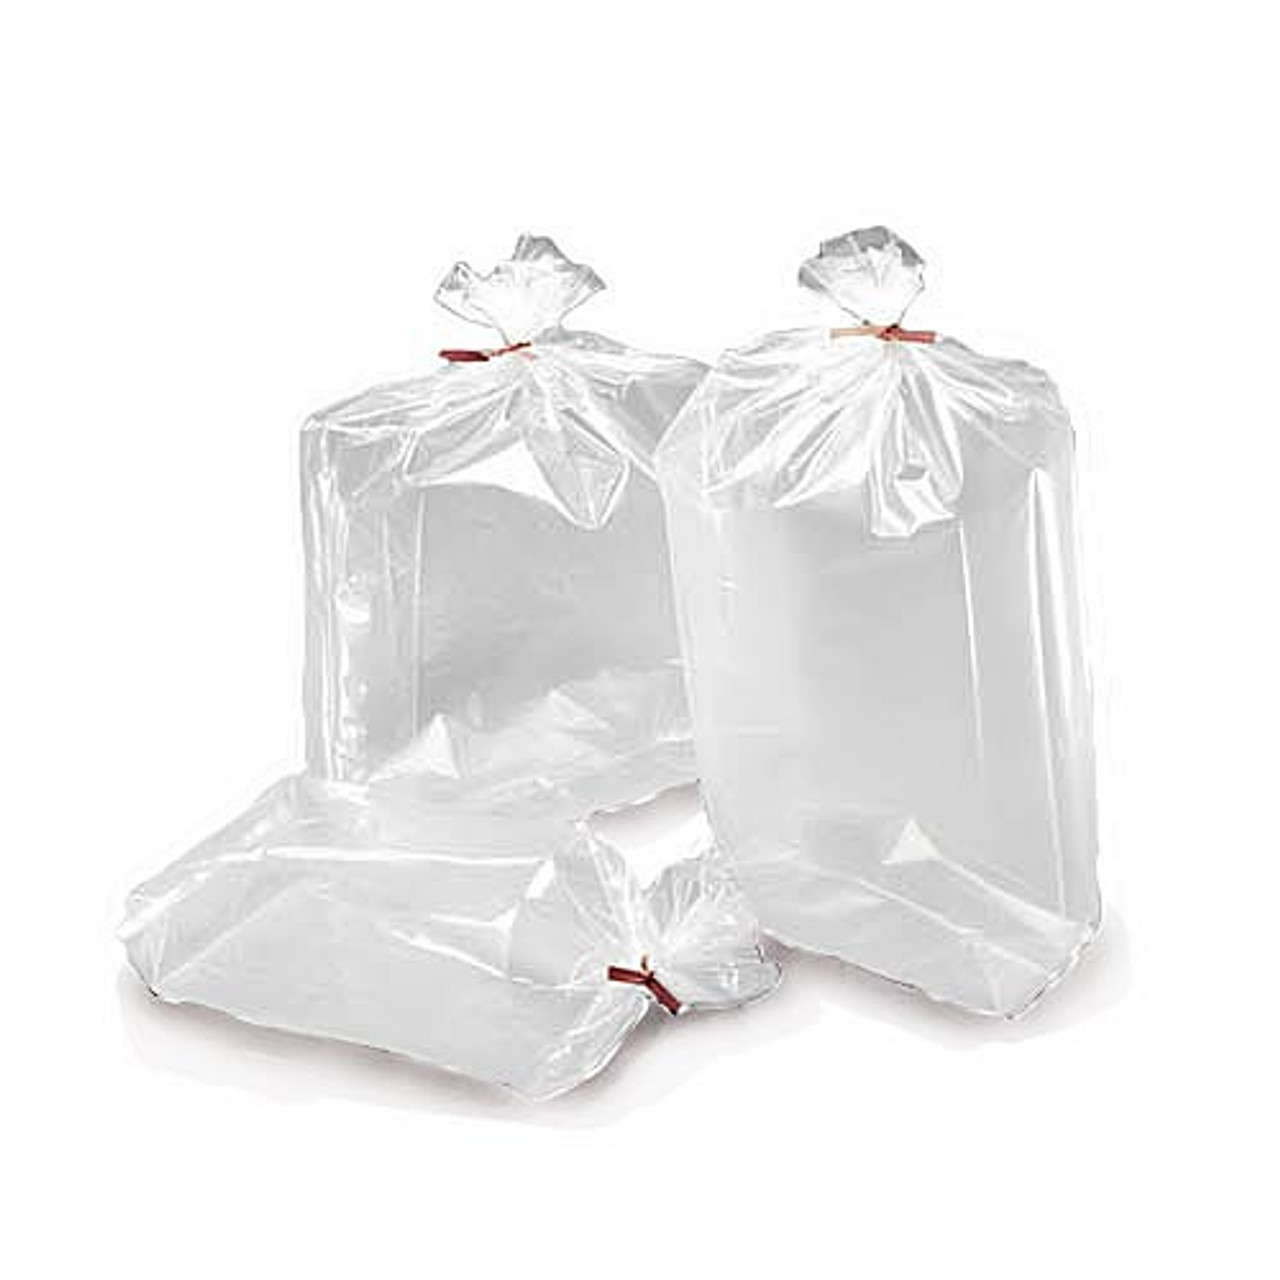 5 Reasons Why Poly Bag Packaging is Still Essential in 2022 - Polybol